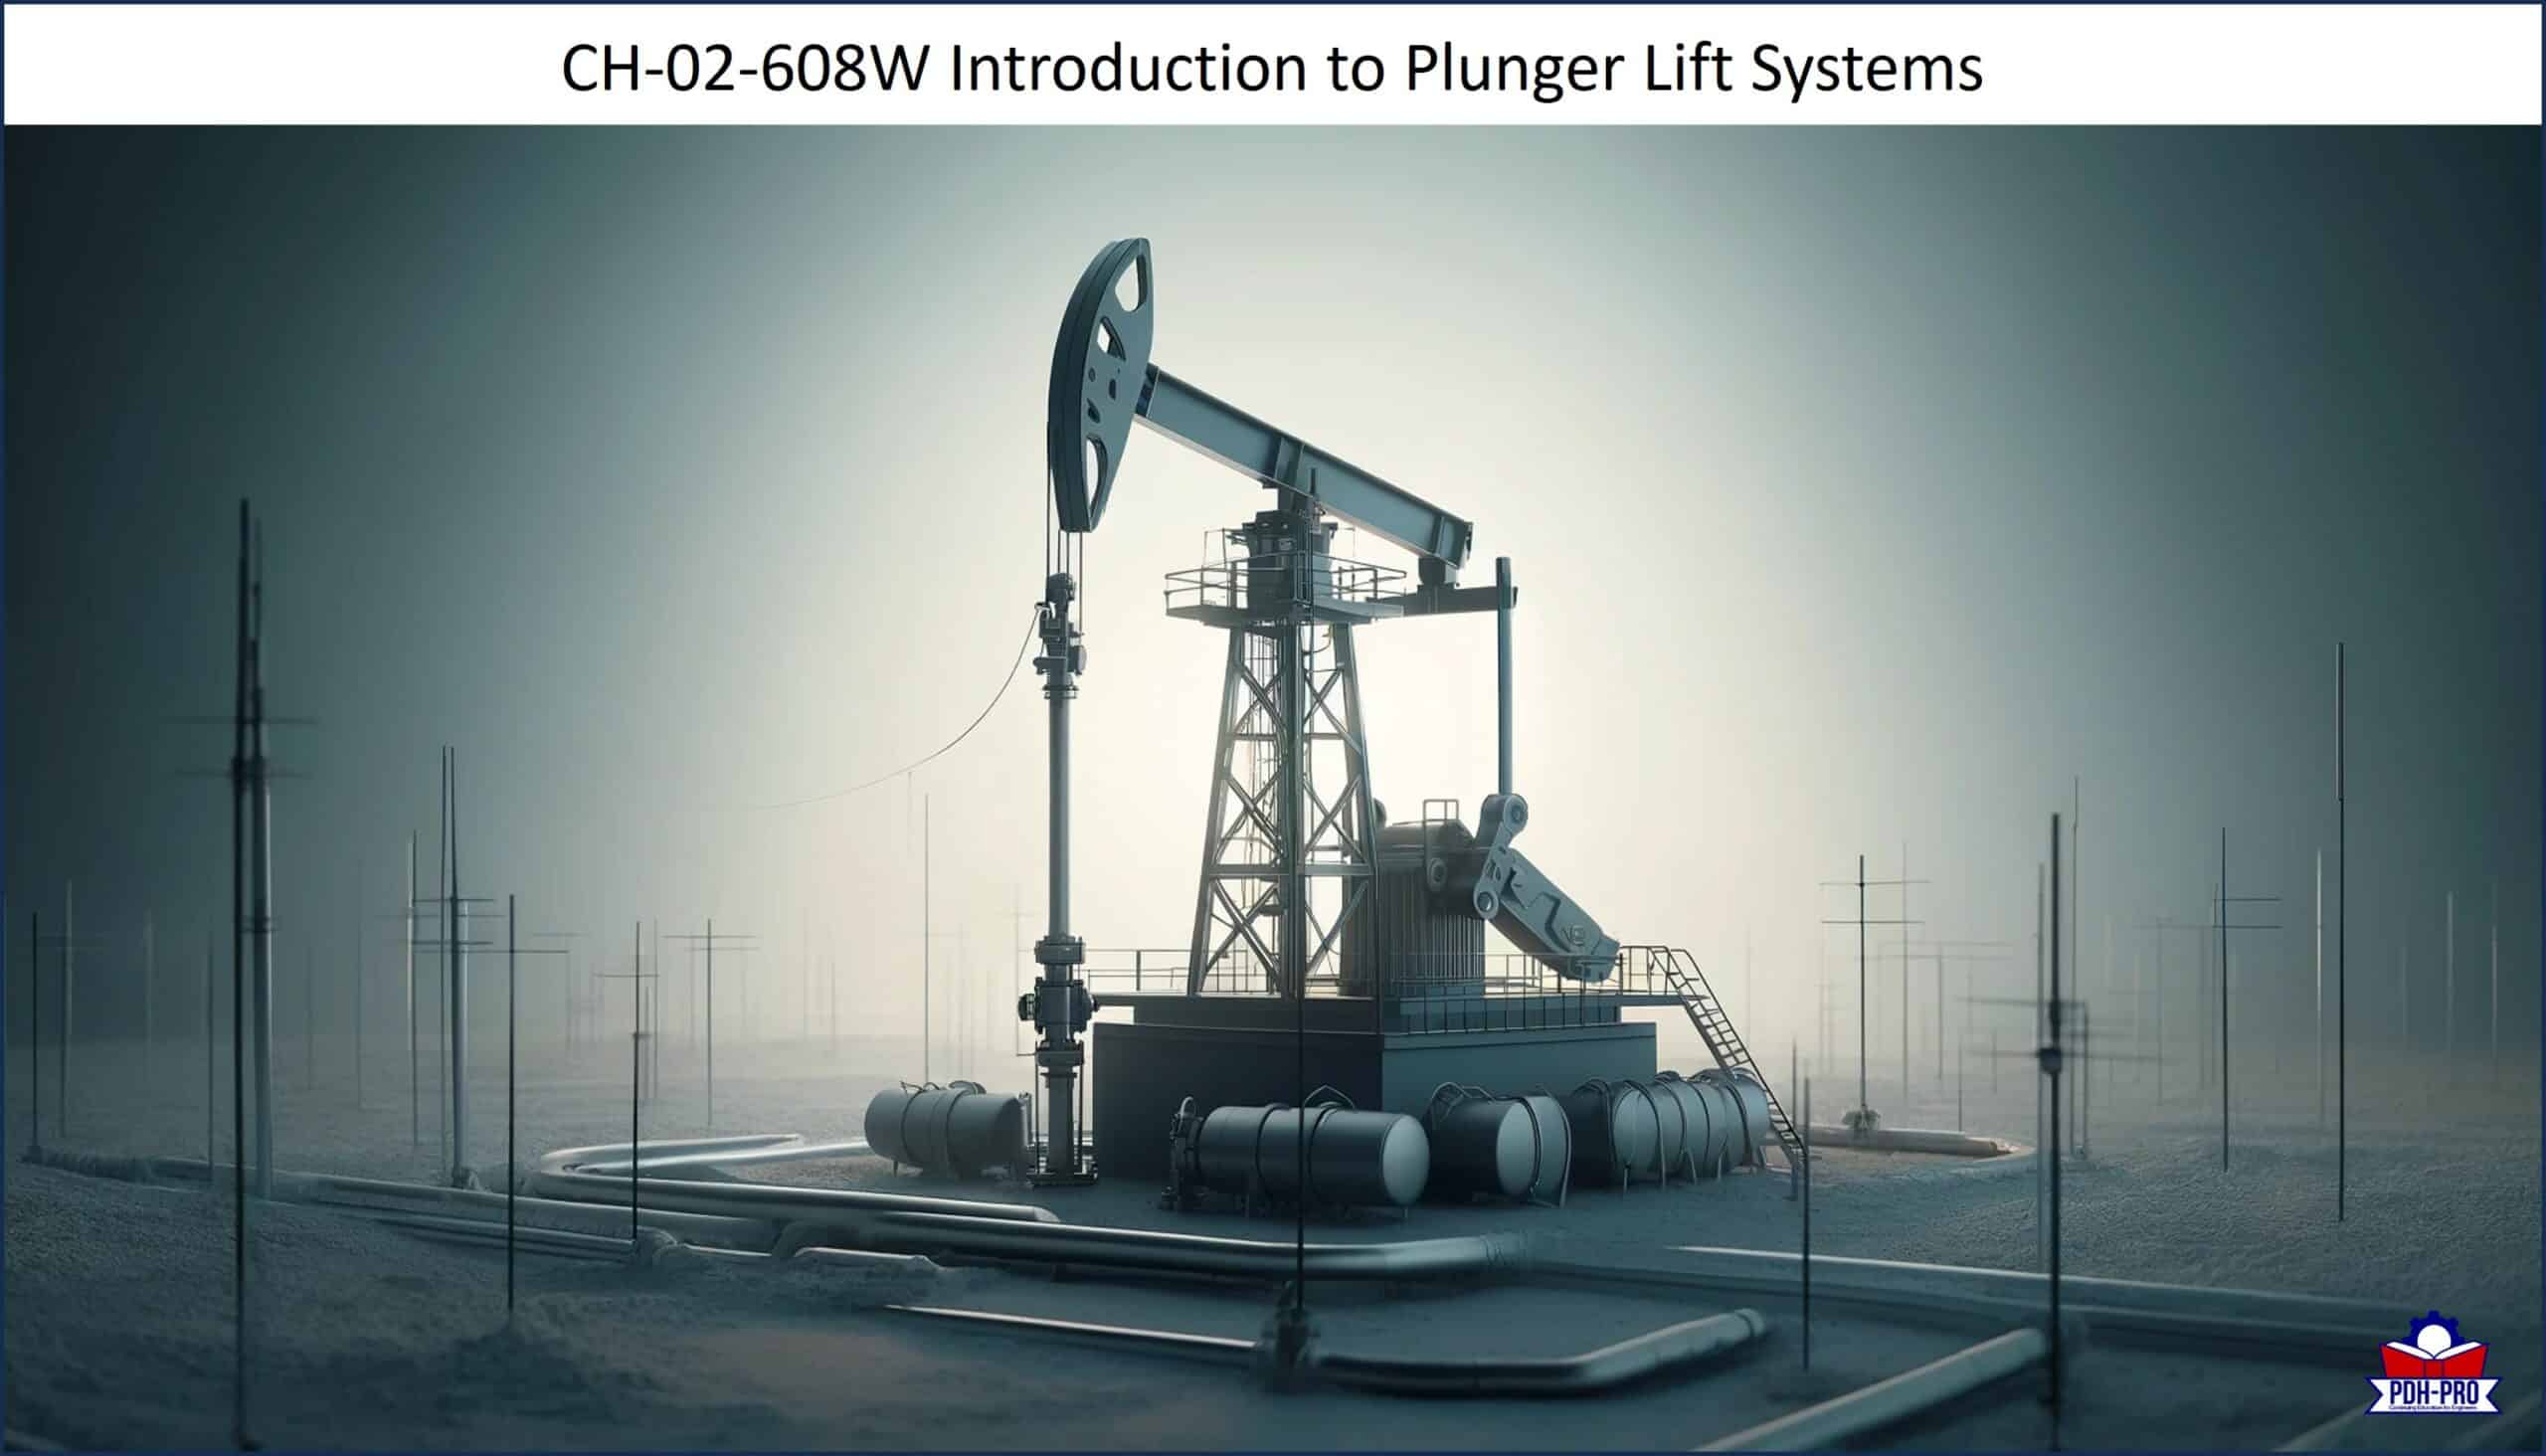 Introduction to Plunger Lift Systems